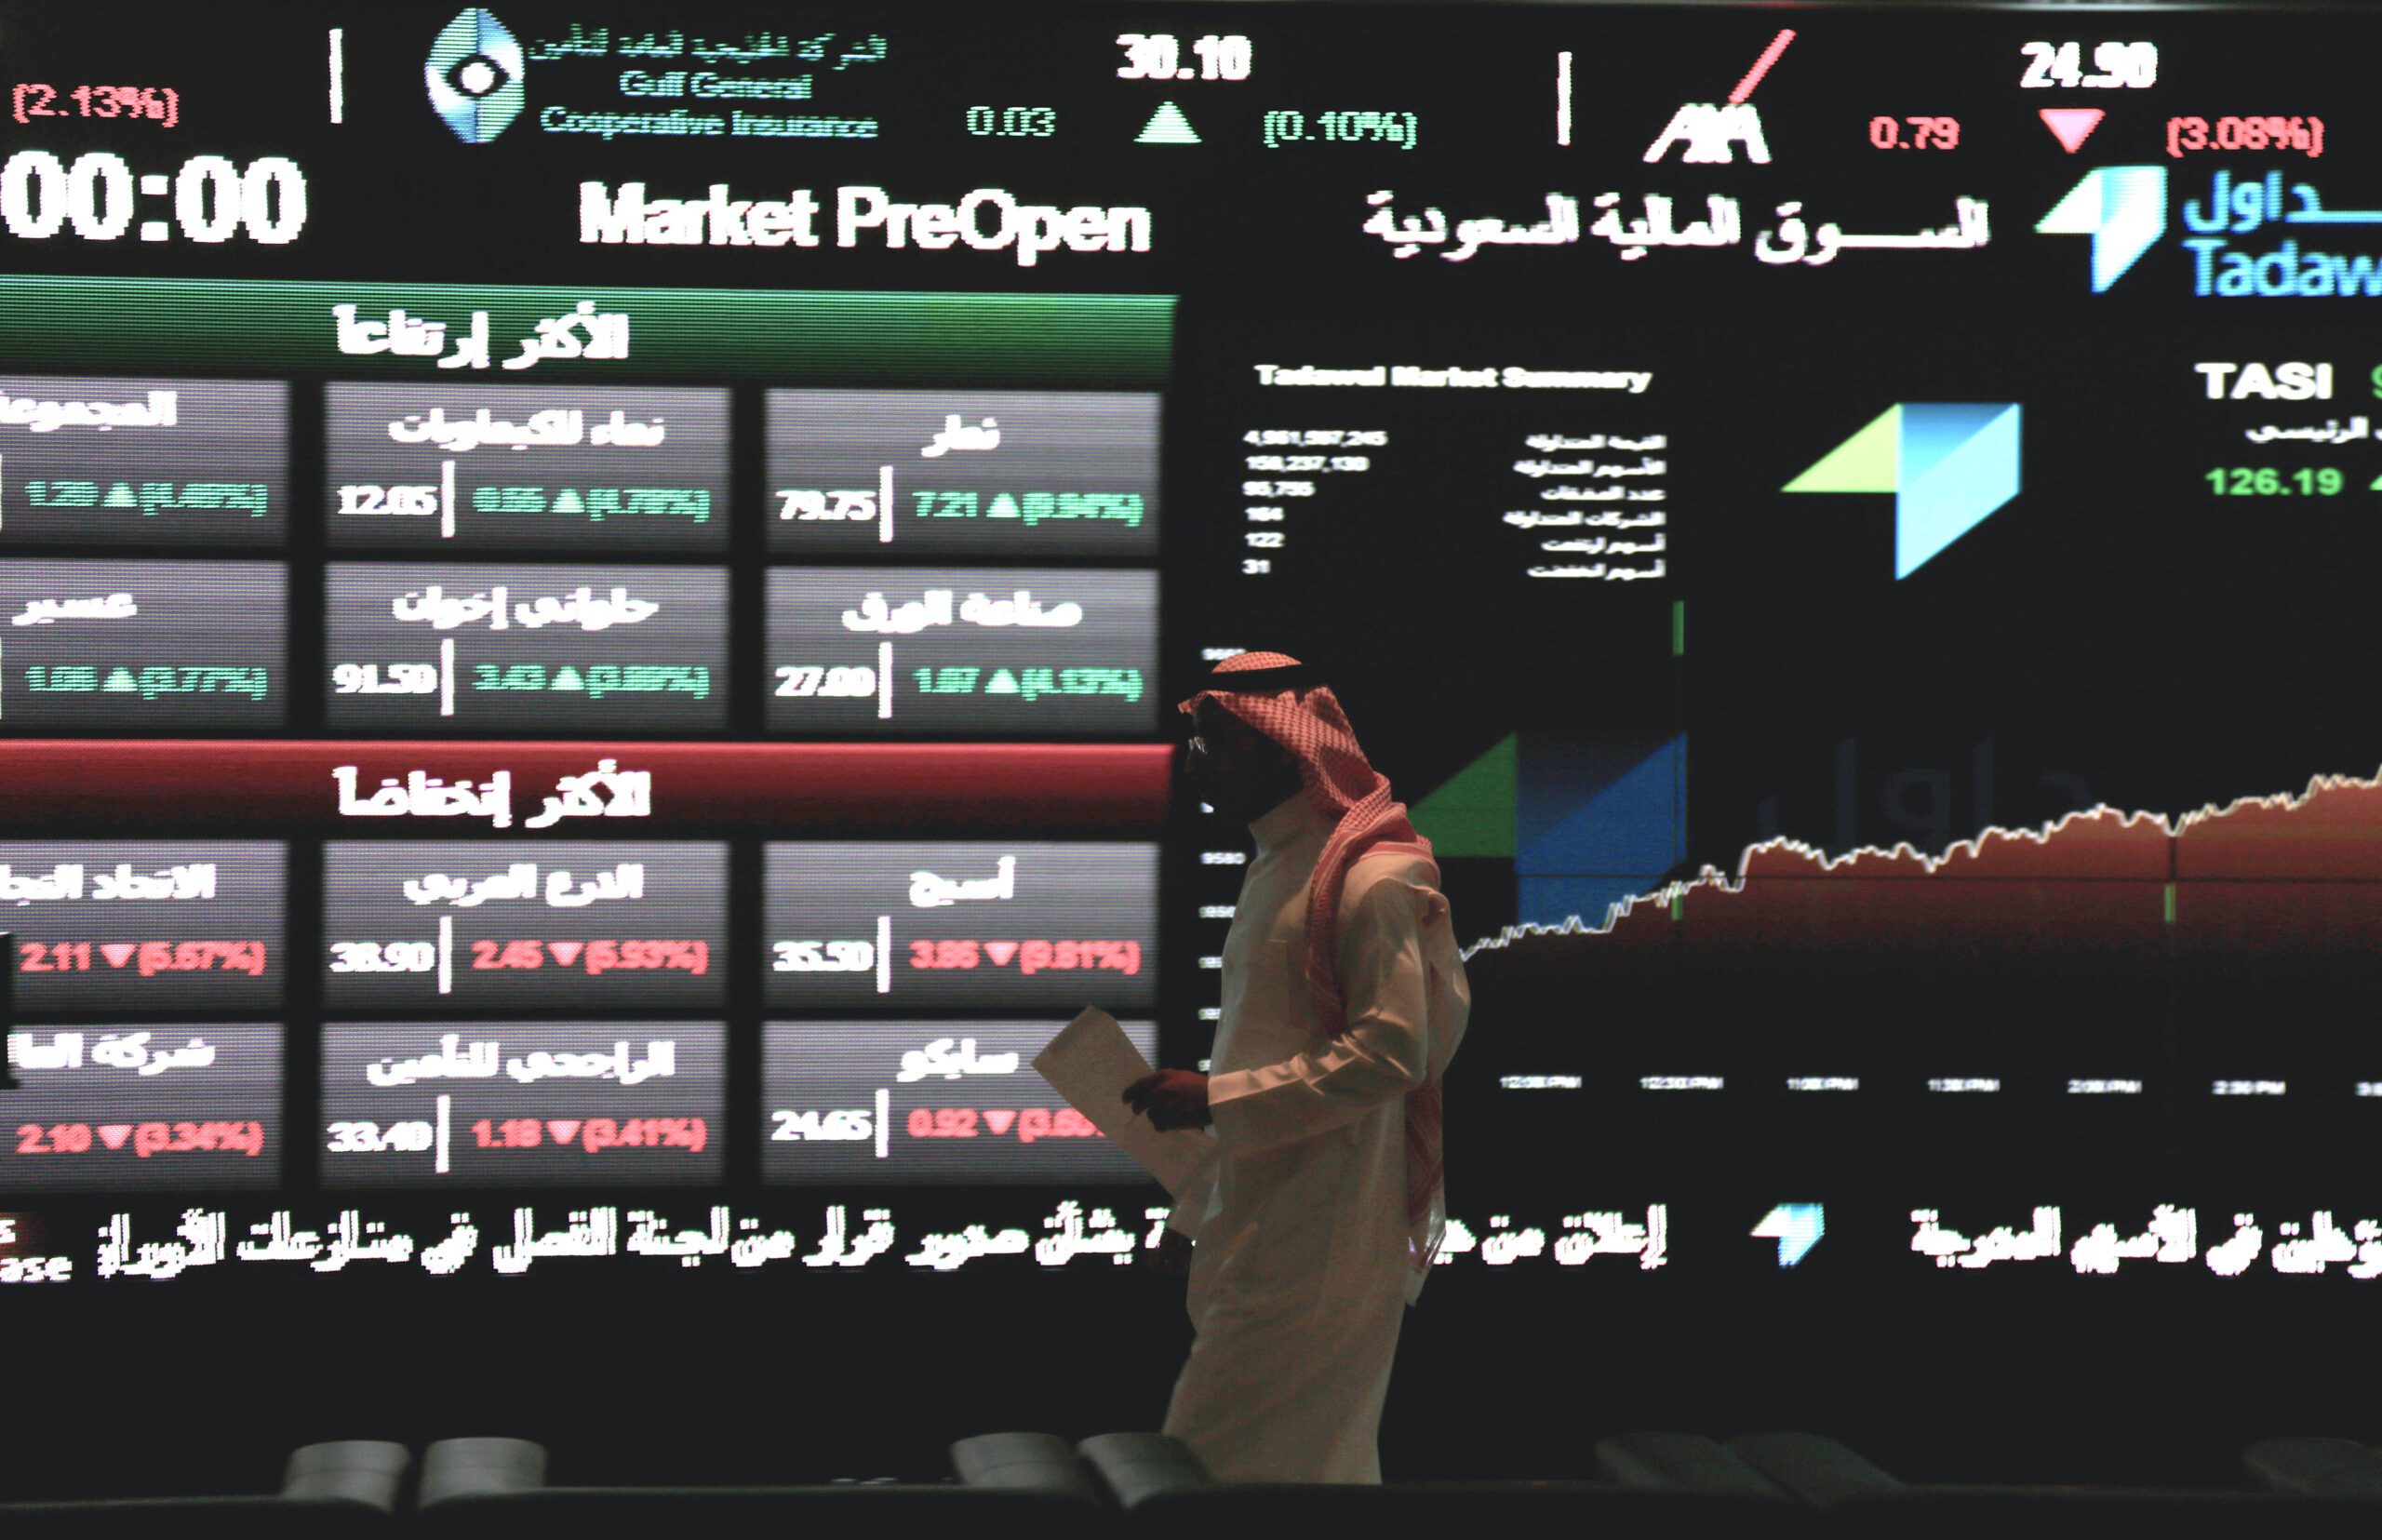 A Tadawul trader looks at prices on the Saudi stock exchange. Aramco's profits have fallen as Riyadh reduces oil output